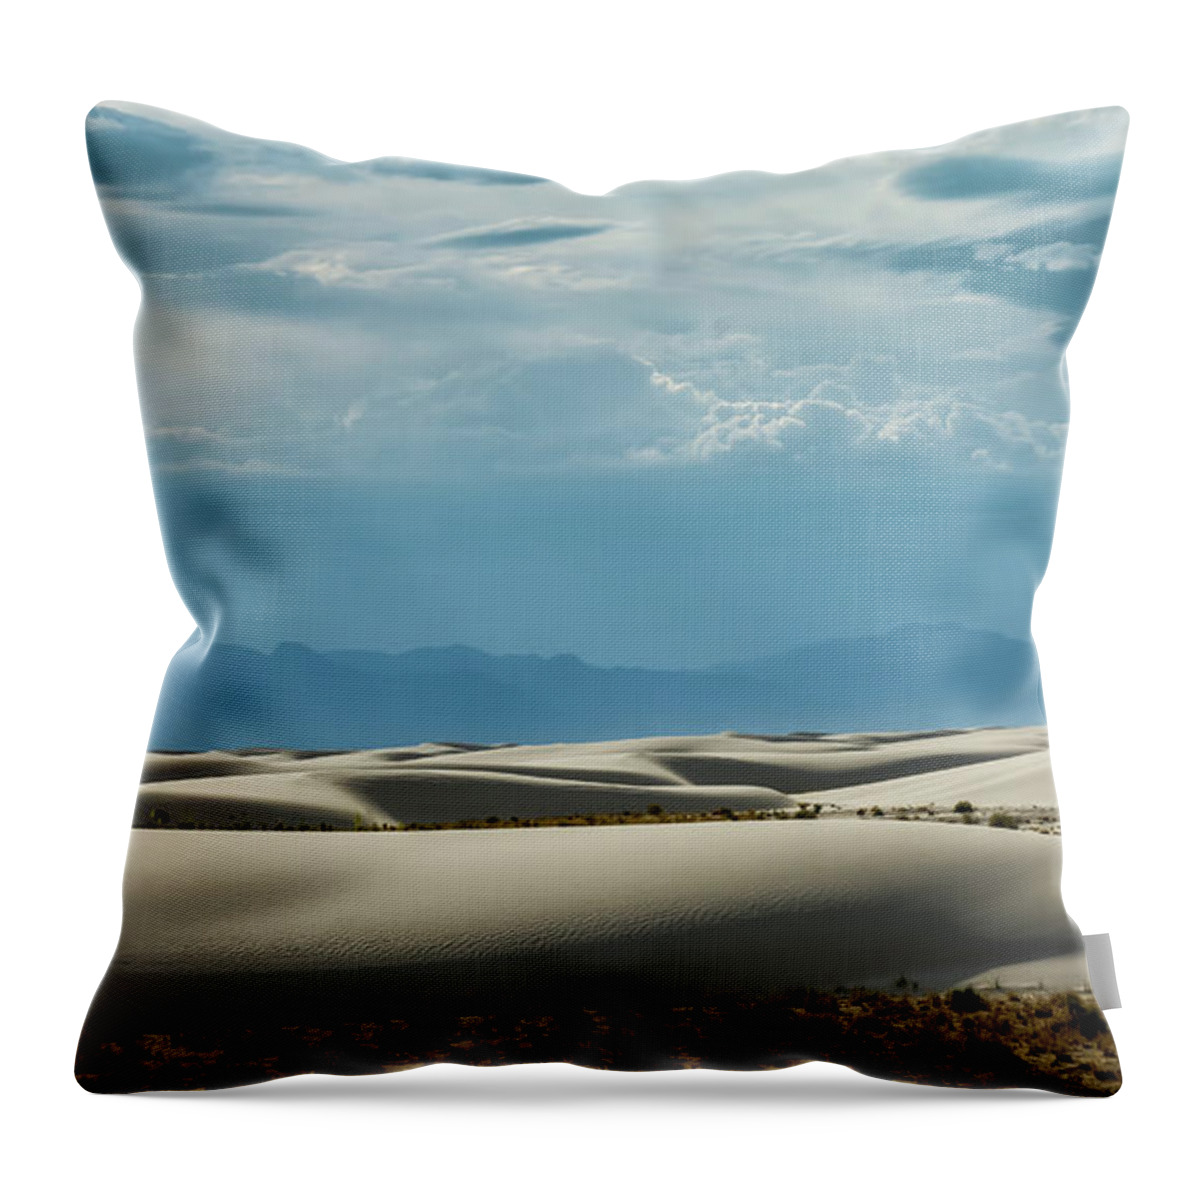 White Sands Throw Pillow featuring the photograph Dunes by James Barber